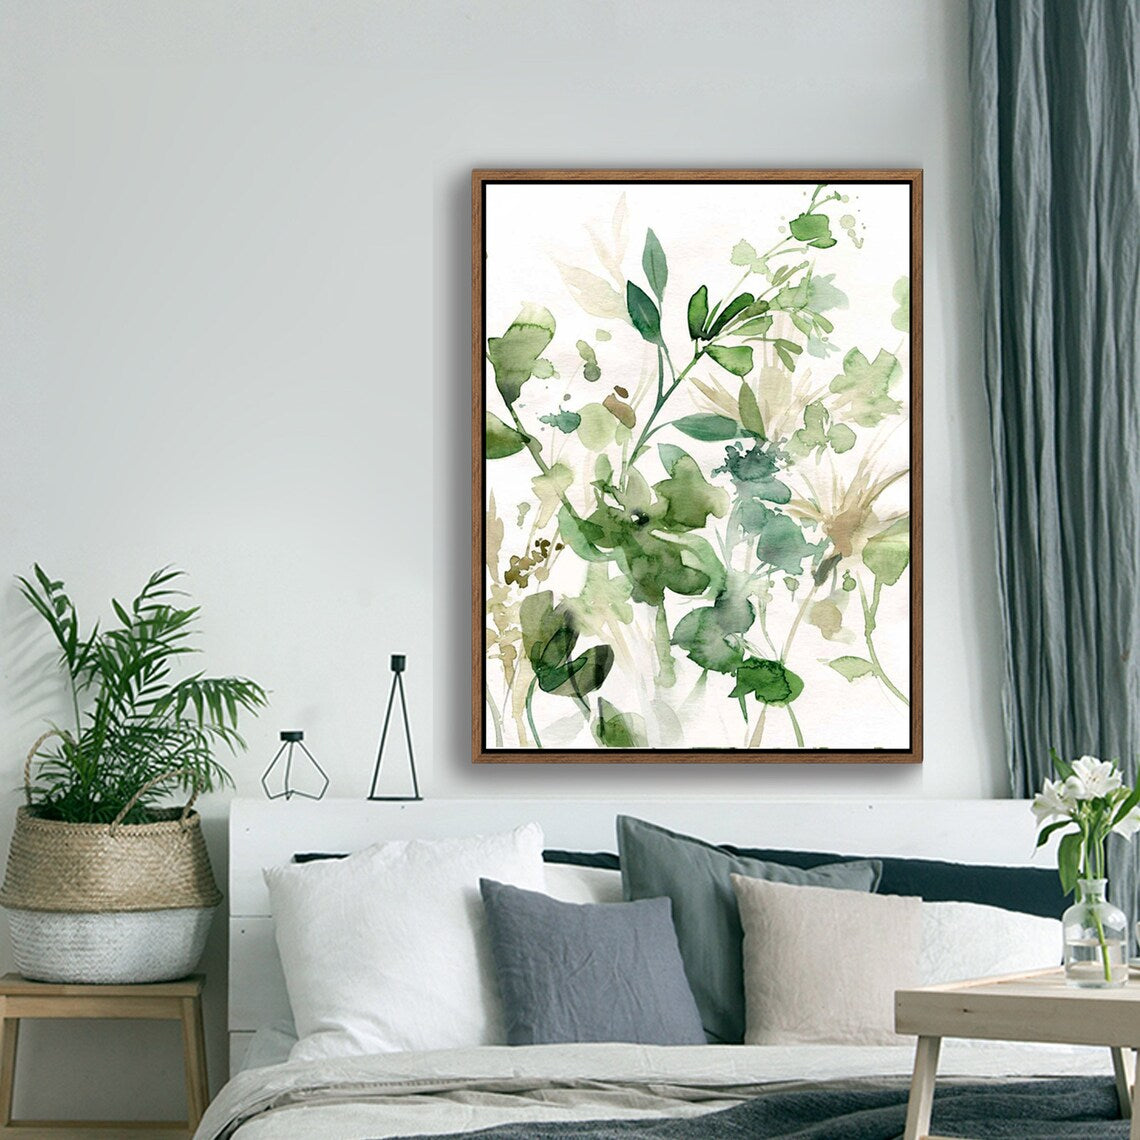 Nature Leaf Grass Watercolor Print on Wood Stretched Canvas with Frame for Vintage Home Decor